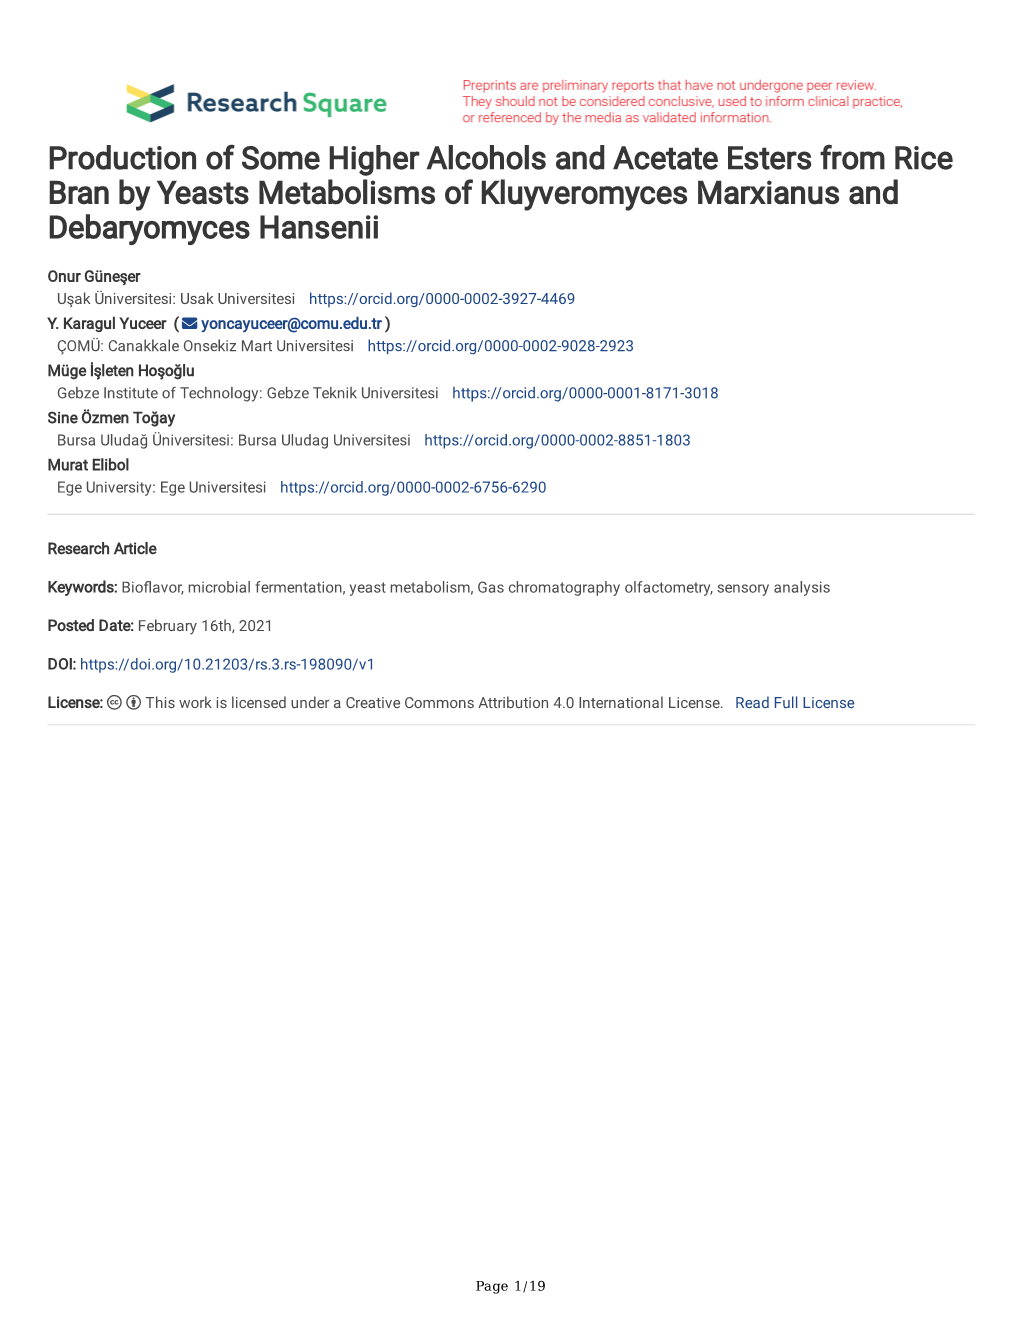 Production of Some Higher Alcohols and Acetate Esters from Rice Bran by Yeasts Metabolisms of Kluyveromyces Marxianus and Debaryomyces Hansenii